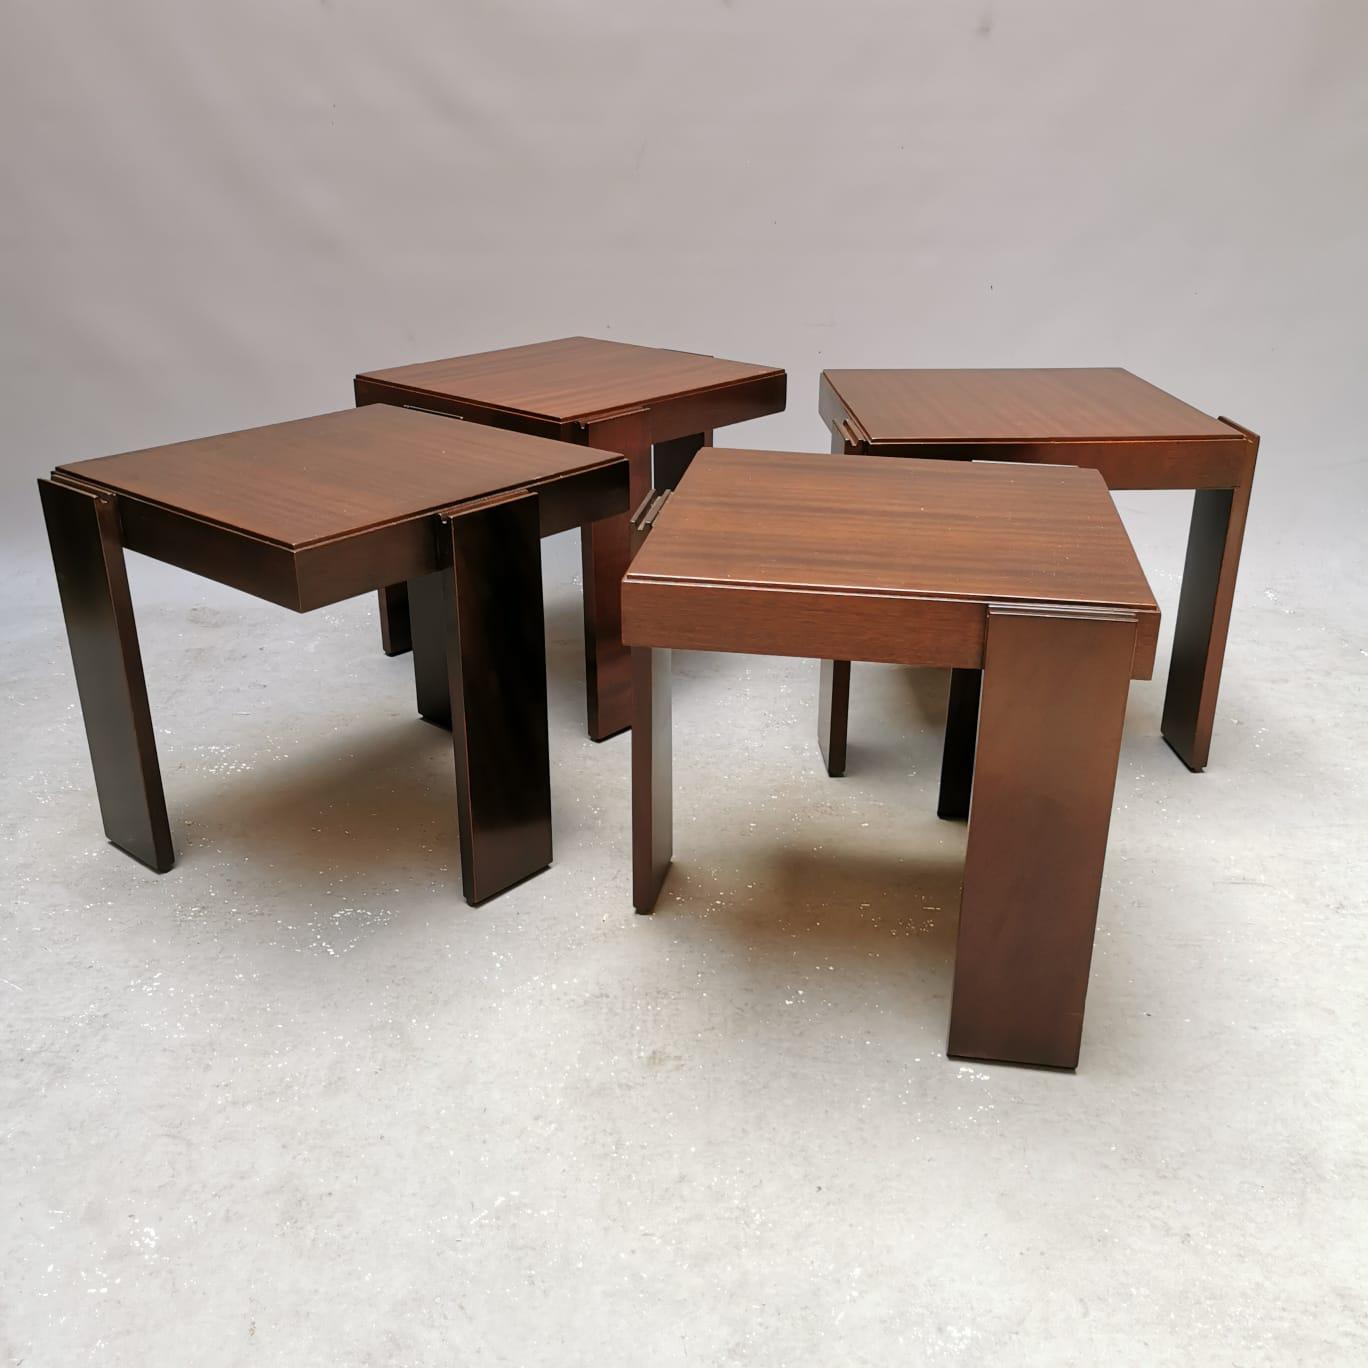 Mid-20th Century Modular Stackable Solid Wood Coffee, Side Tables by Frattini for Cassina